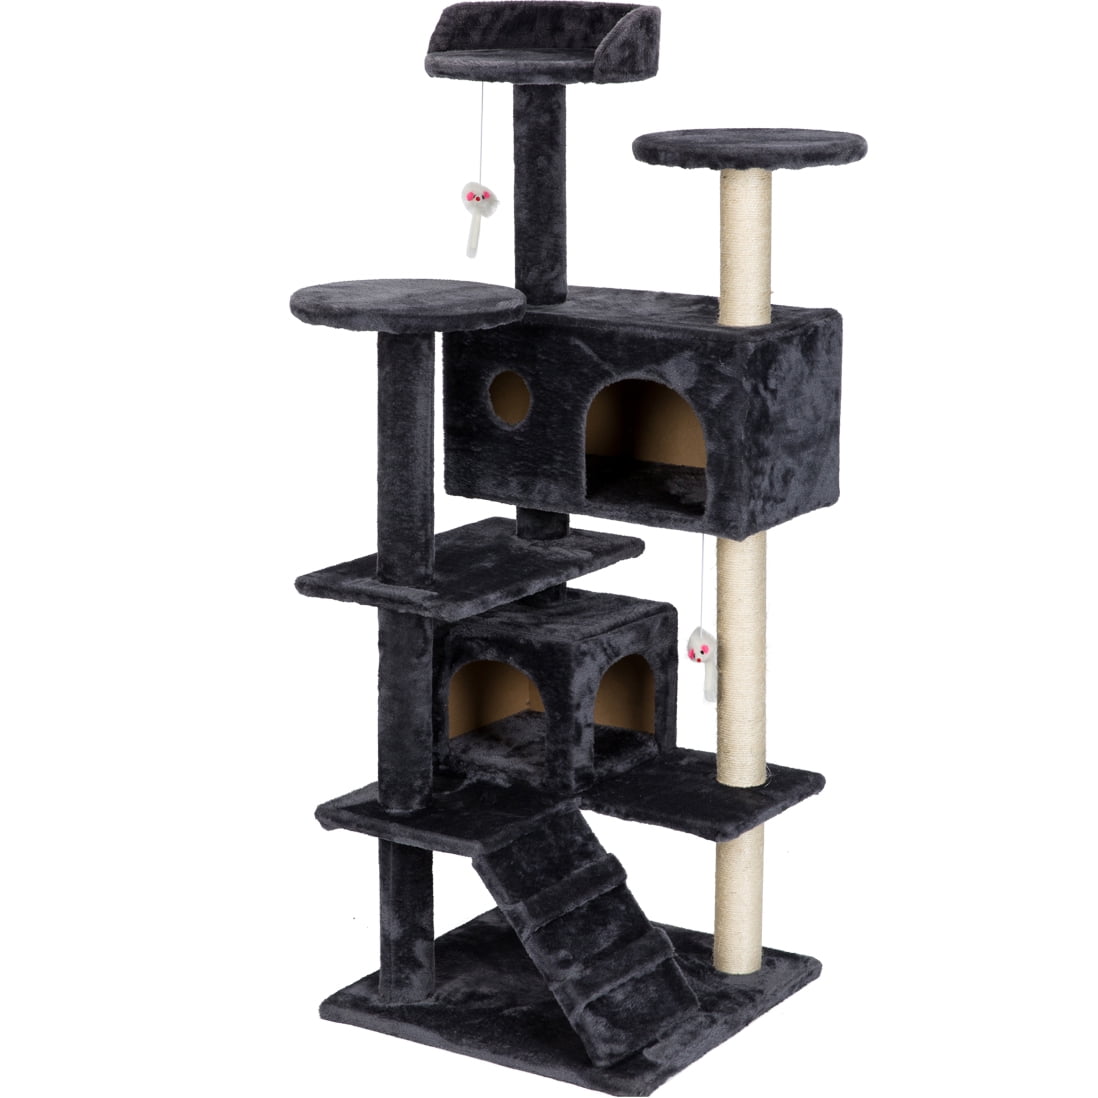 CLEARANCE! 2019 Upgrade Cat Tree, 51'' Cat Tower Luxury Condos with ...